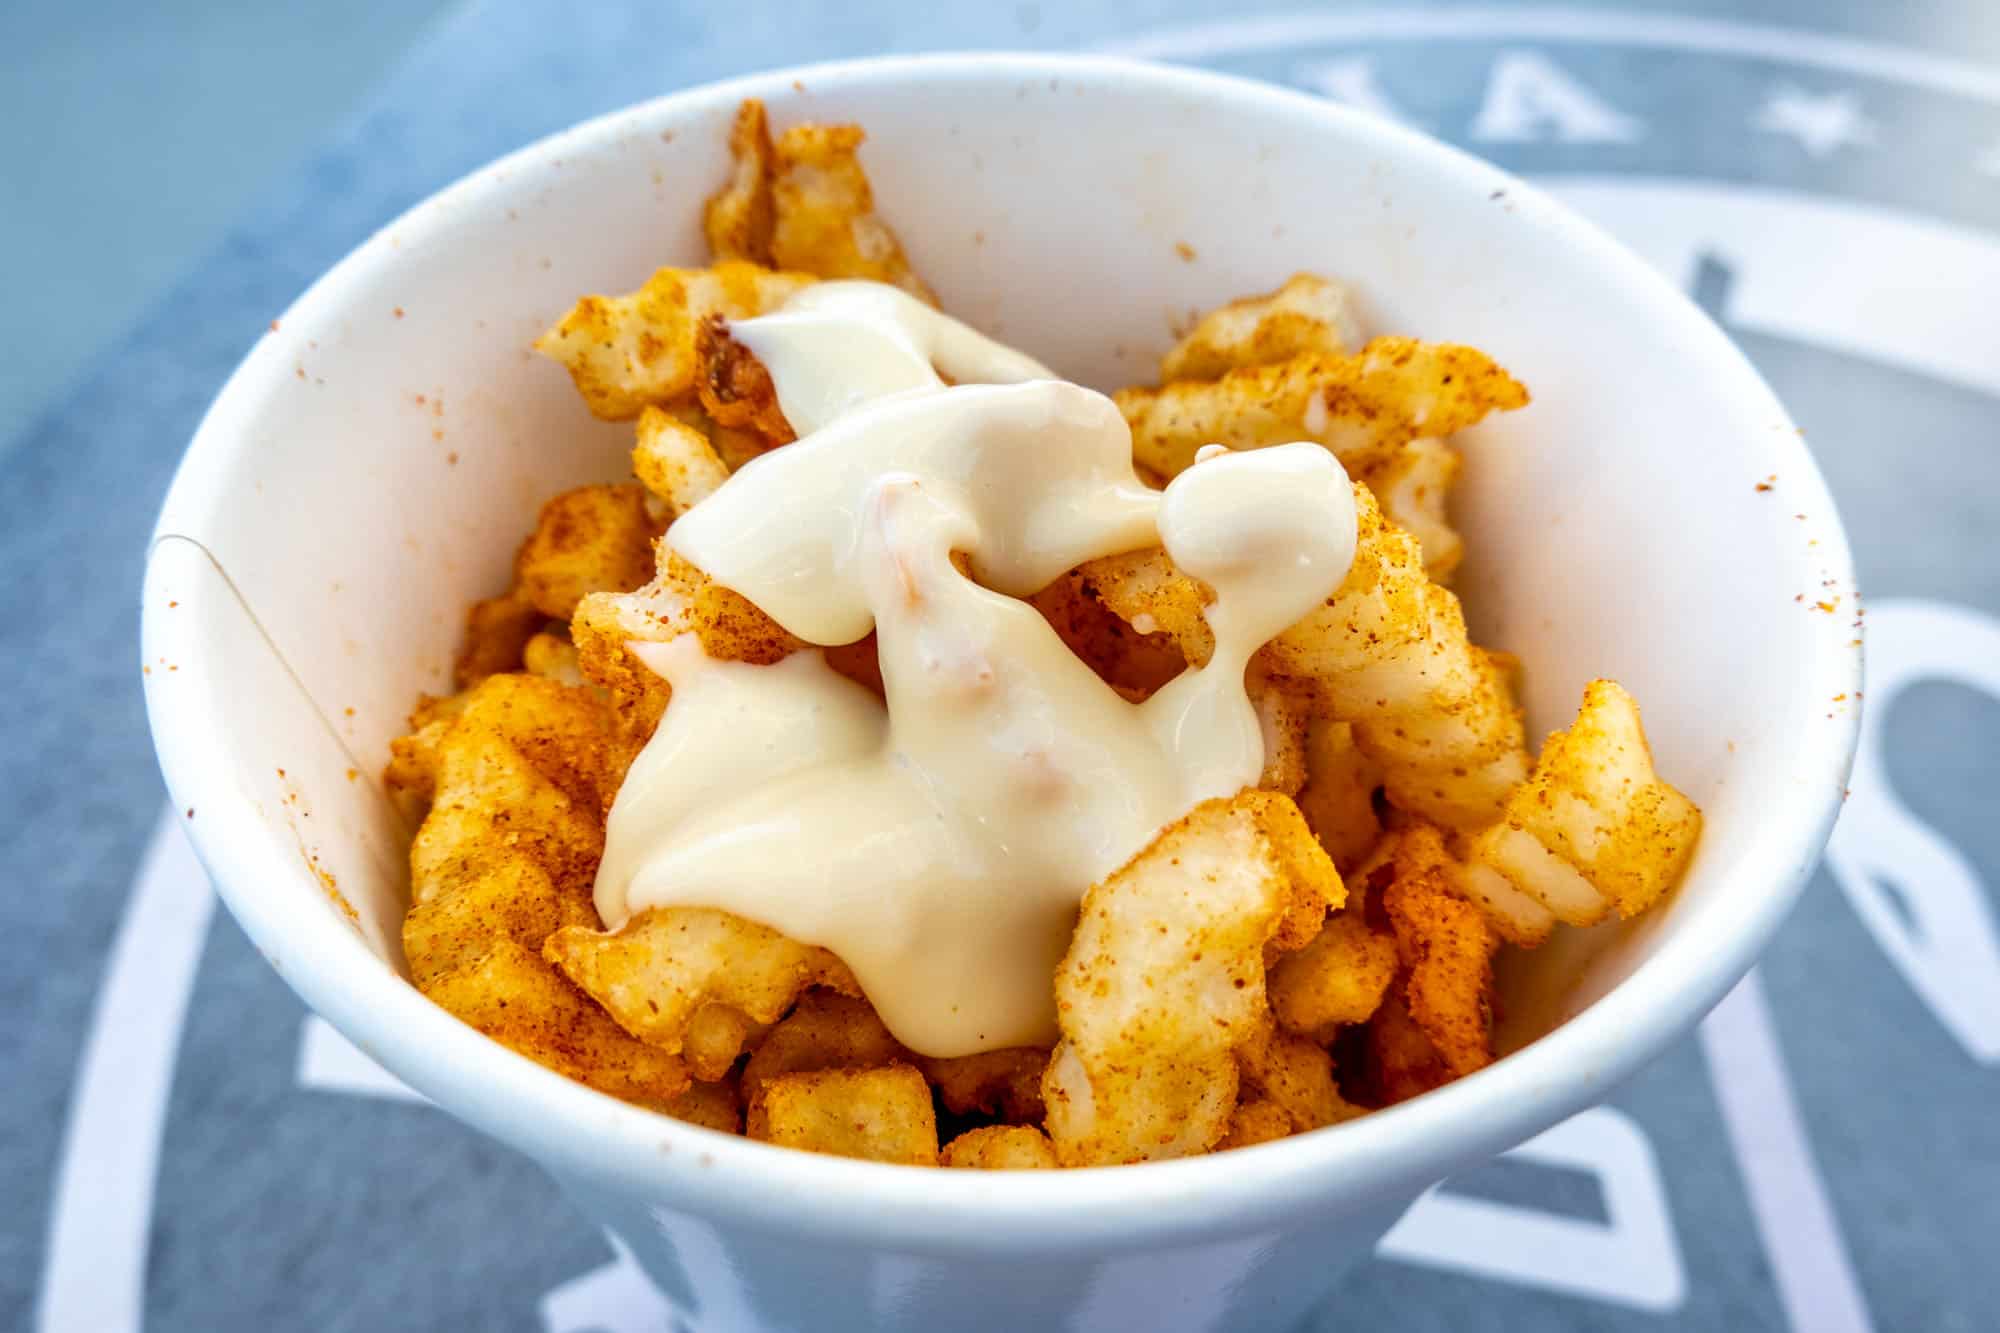 Crinkle French fries covered with spices and cheese sauce in a cup